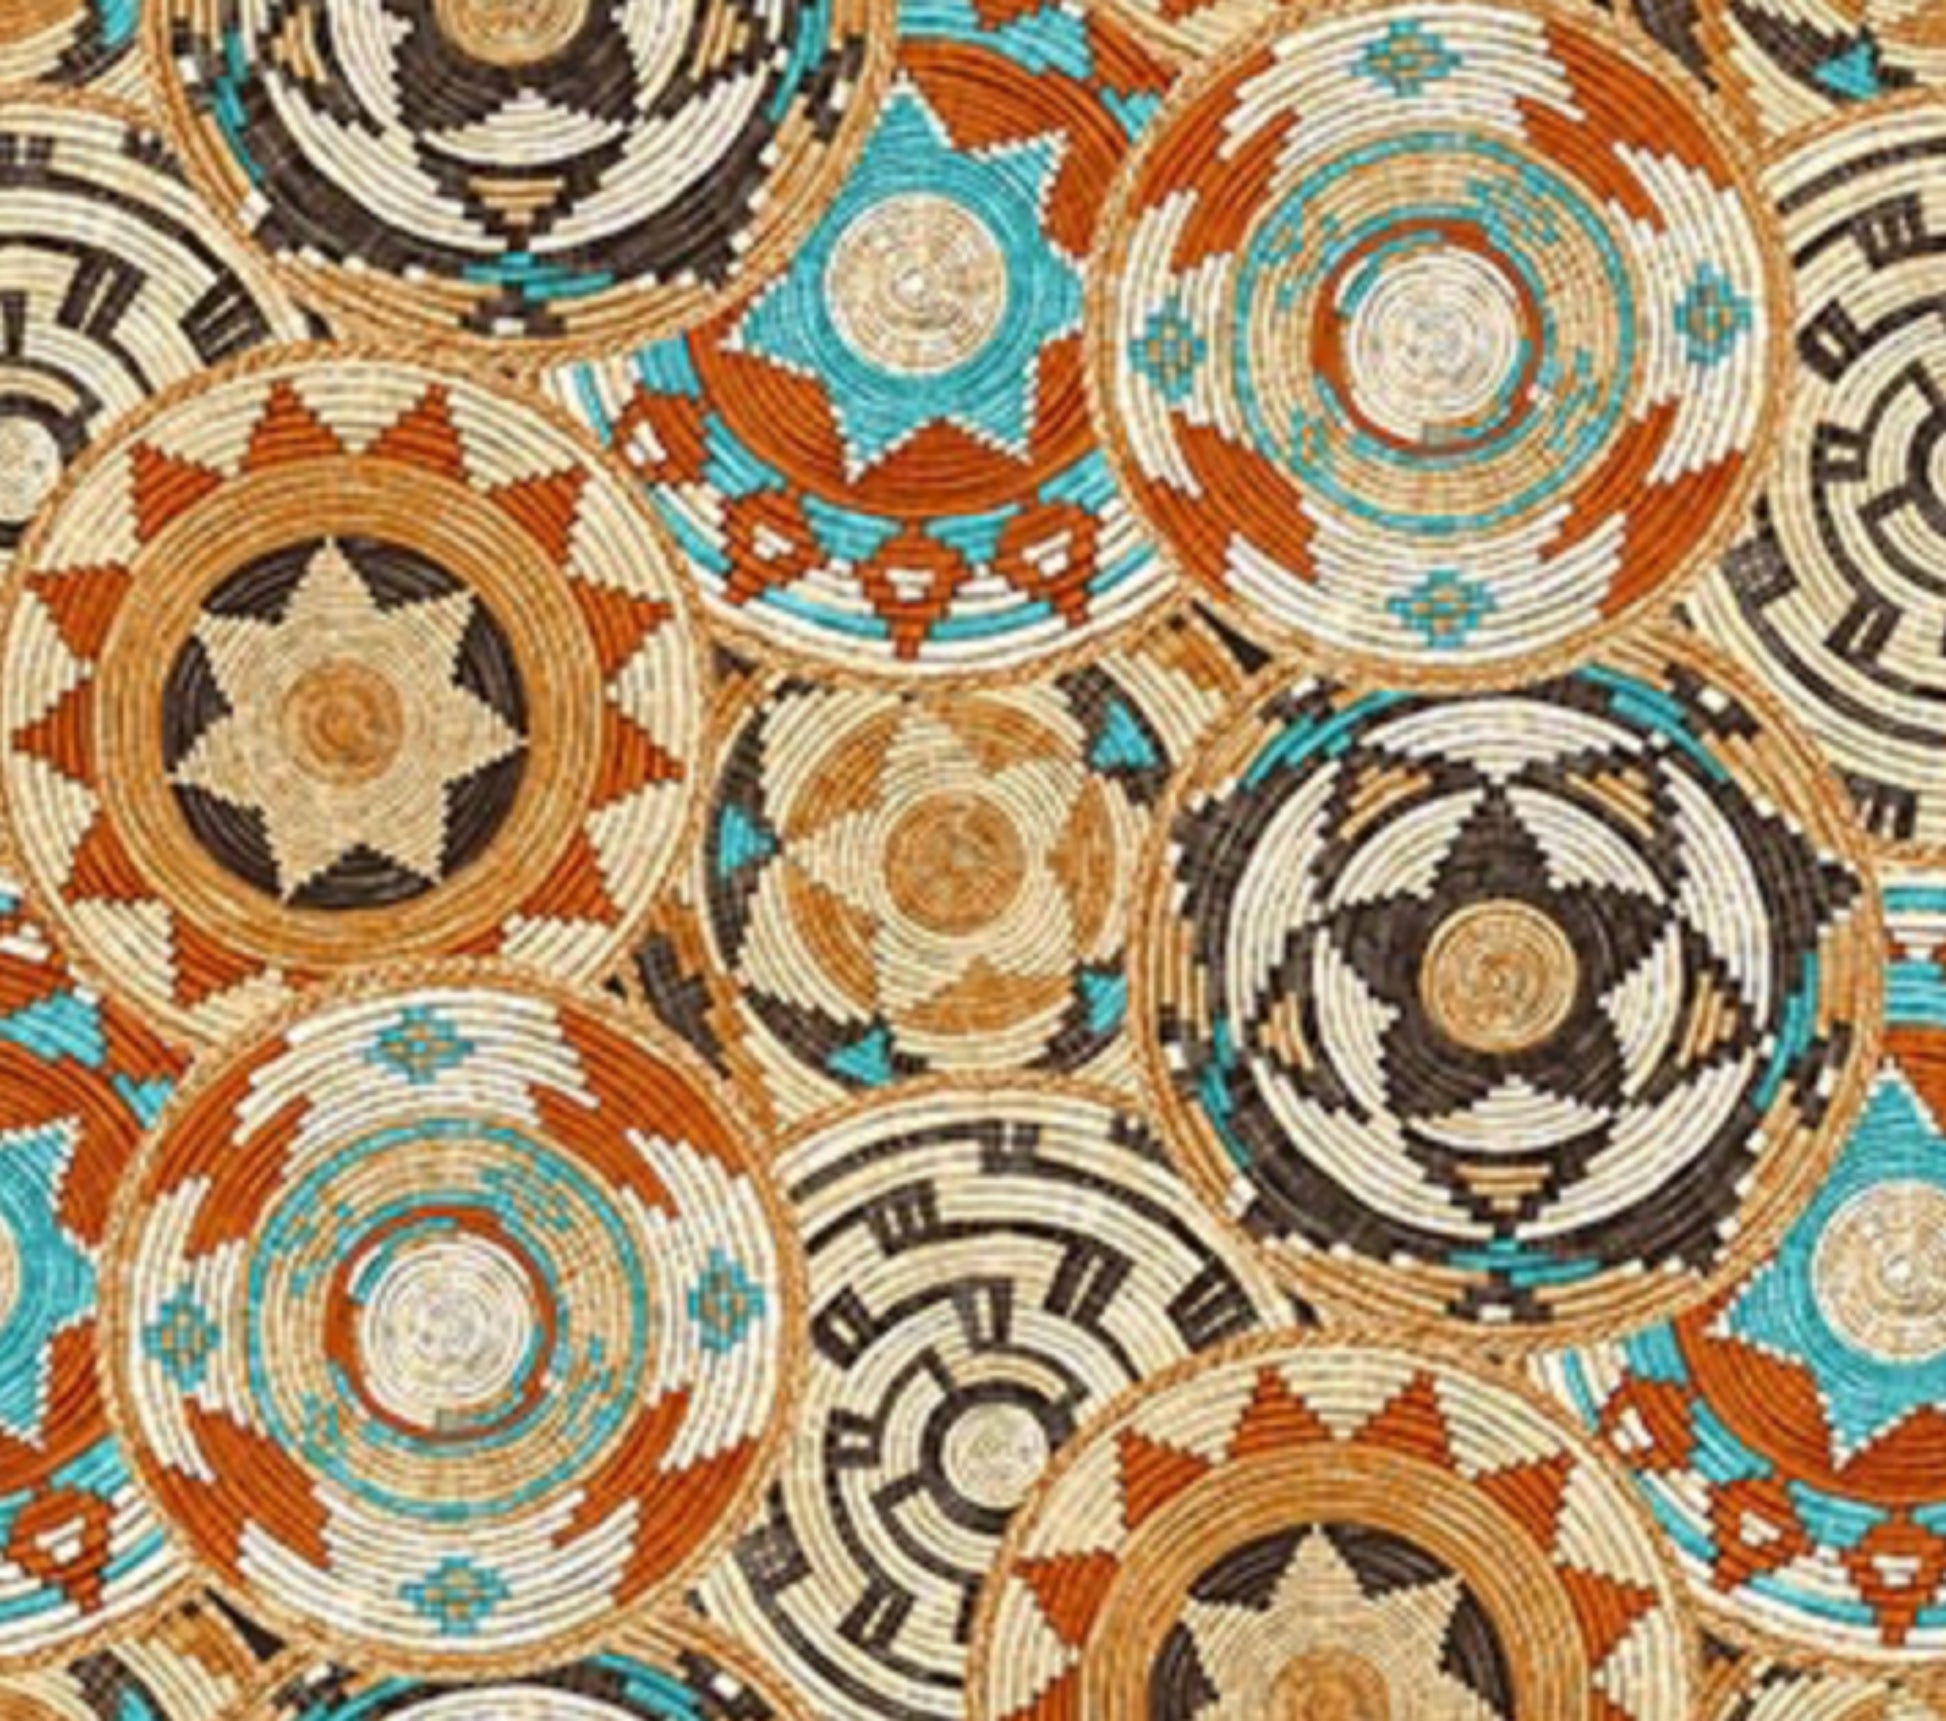 Baskets Fabric from the Southwestern Vista Collection by Deborah Edwards for Northcott Fabrics